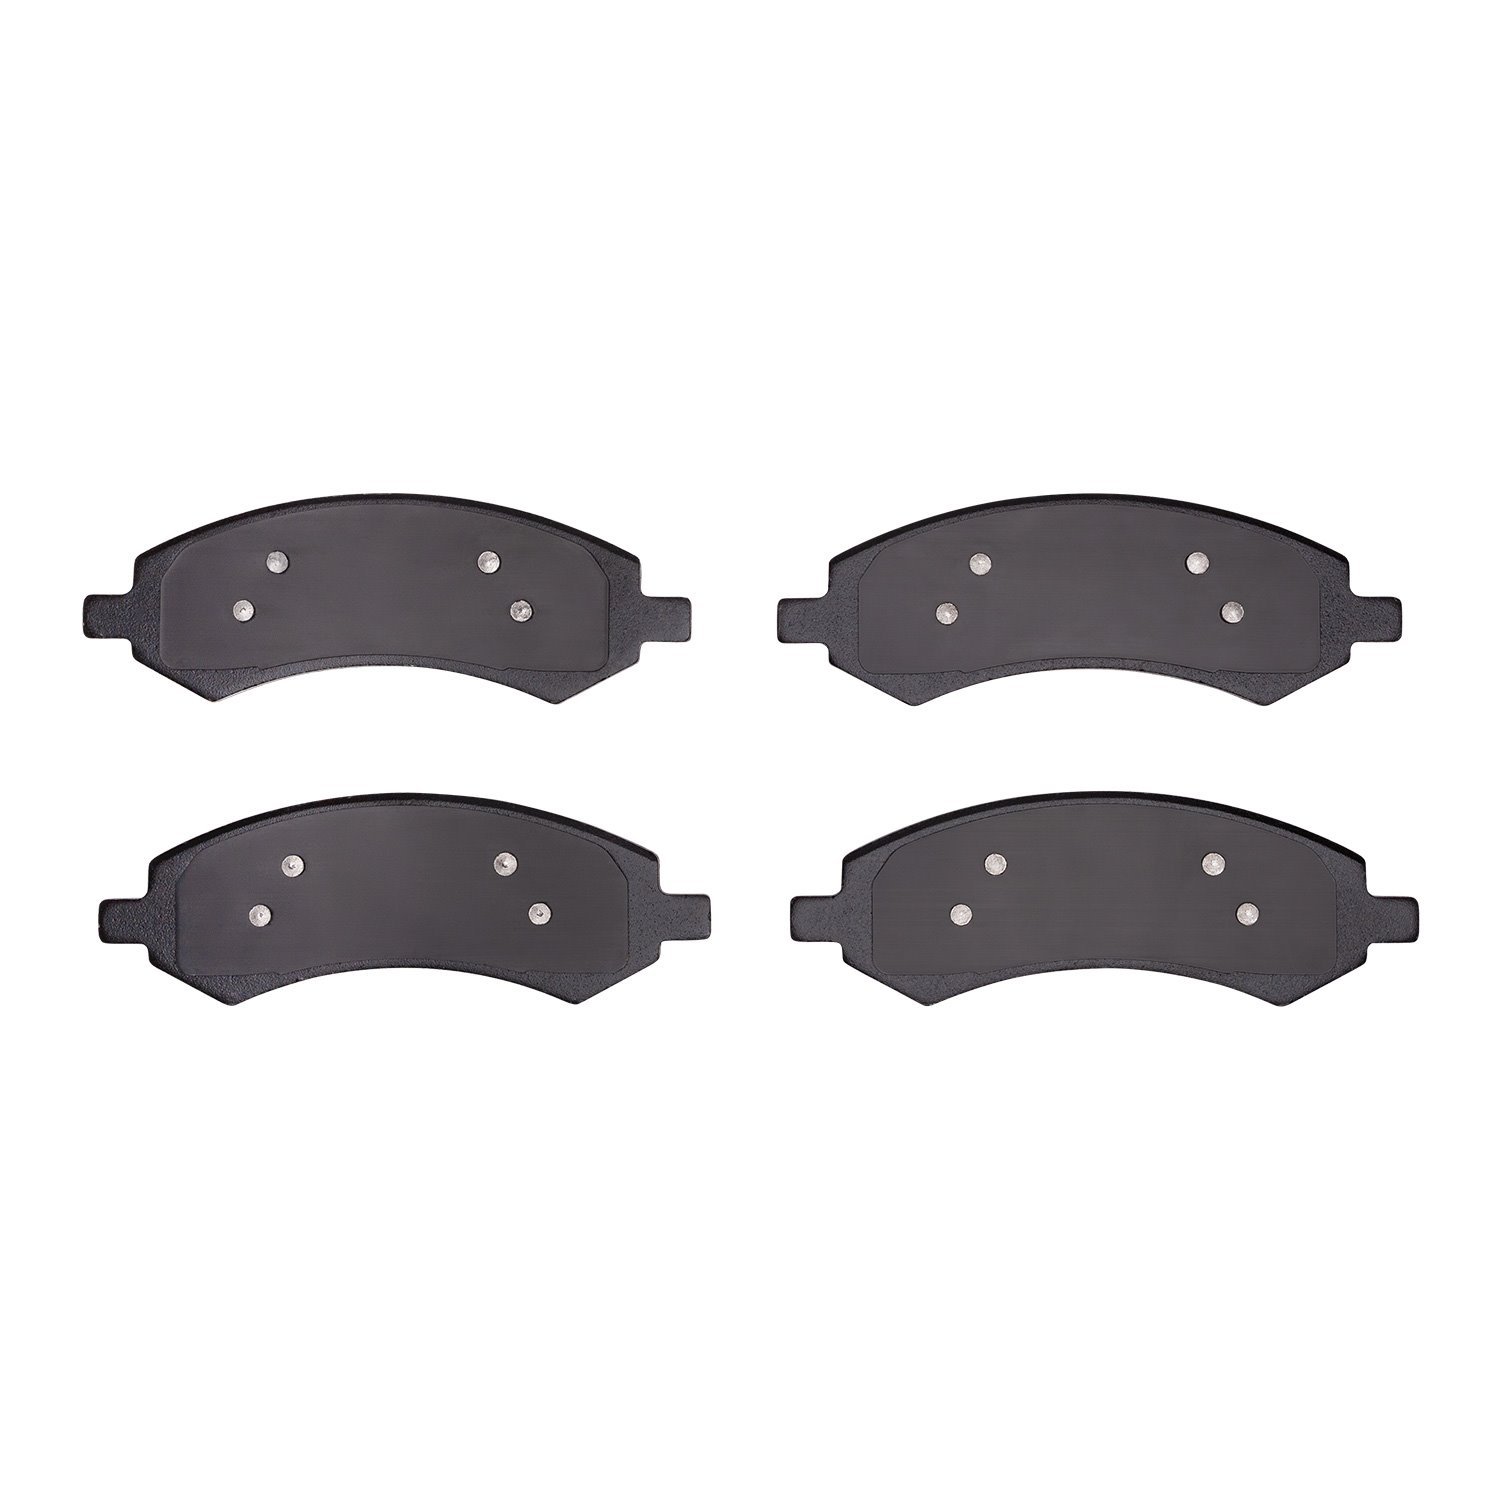 1311-1084-00 3000-Series Semi-Metallic Brake Pads, Fits Select Multiple Makes/Models, Position: Front